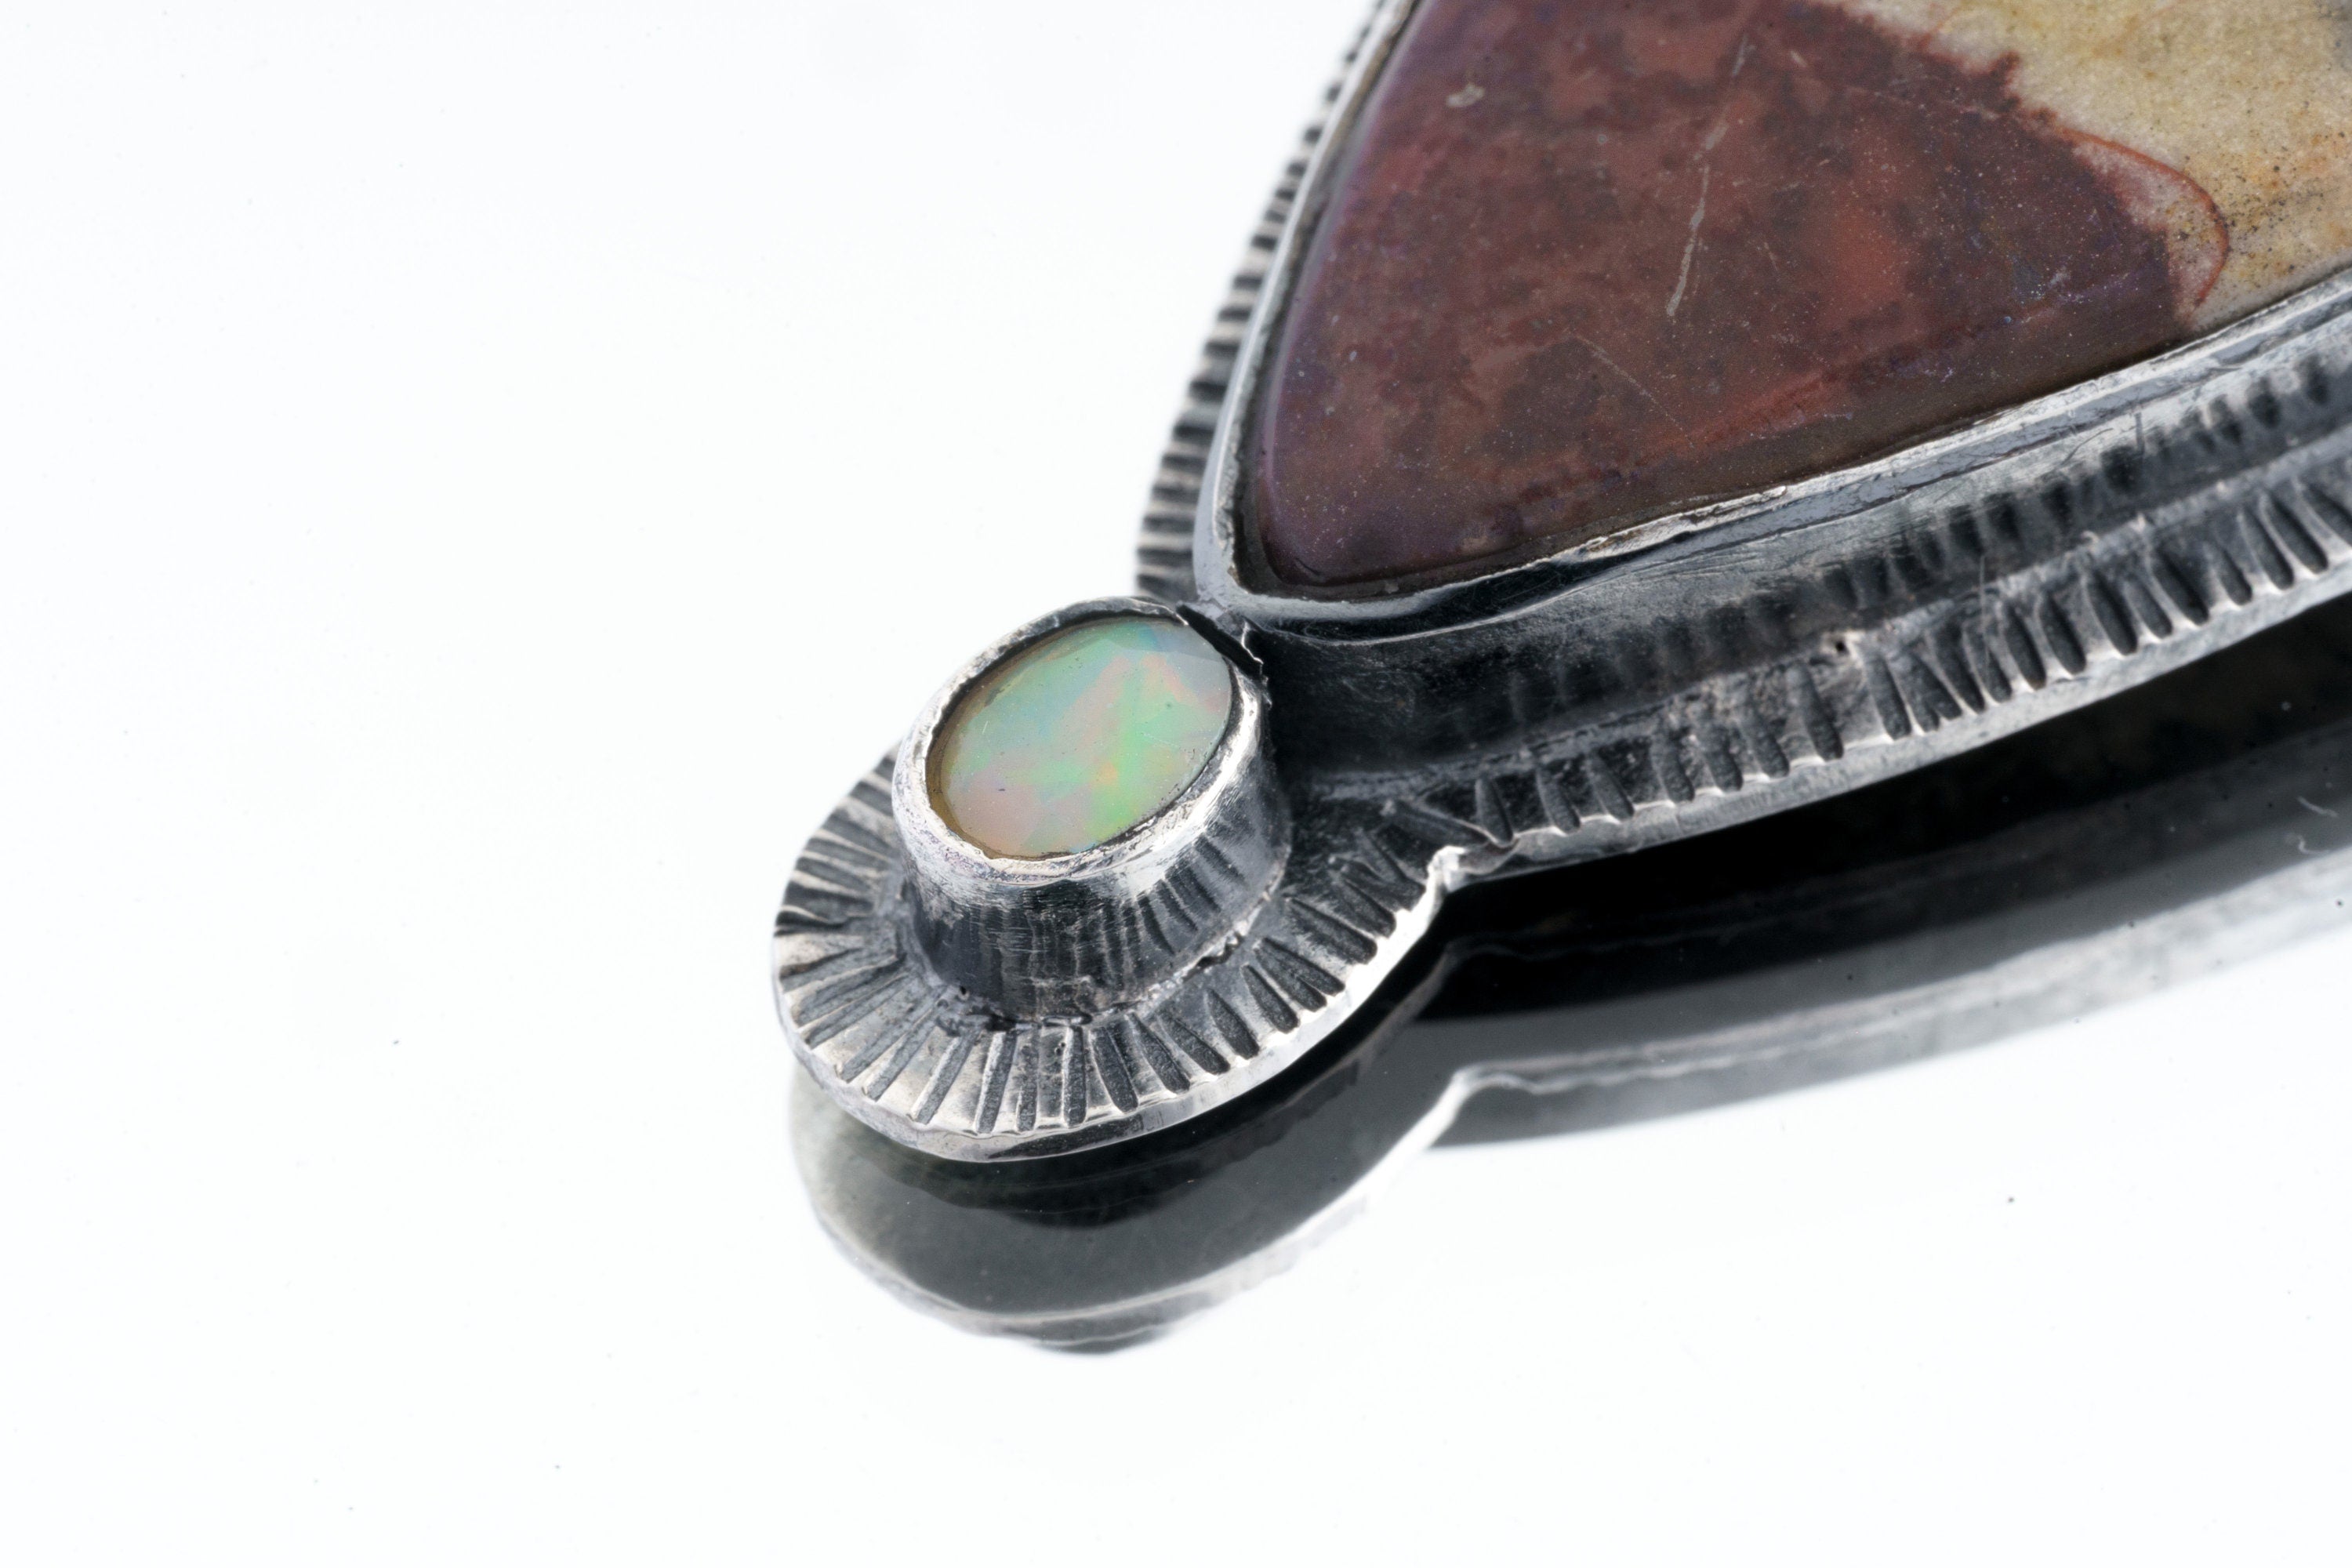 Grounding Australian Mookaite and Fiery Ethiopian Opal Pendant - Oxidised Sterling Silver with Sun Ray Details